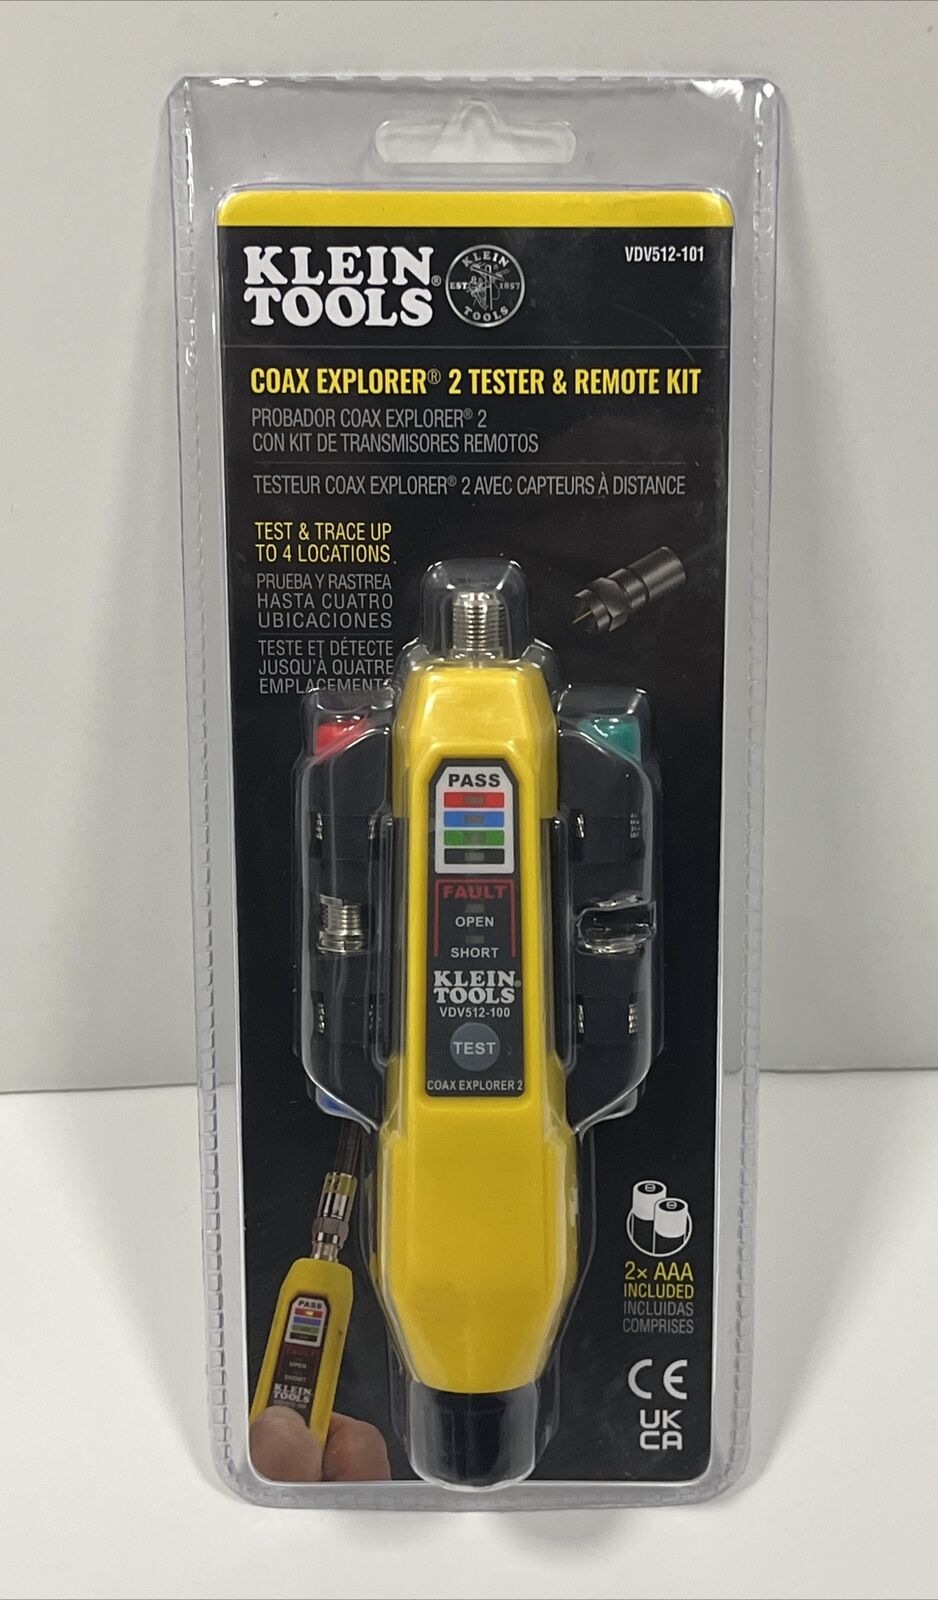 Klein Tools VD512-101 Coax Explorer 2 Coax Cable Tester Tracer & Remote Kit NEW